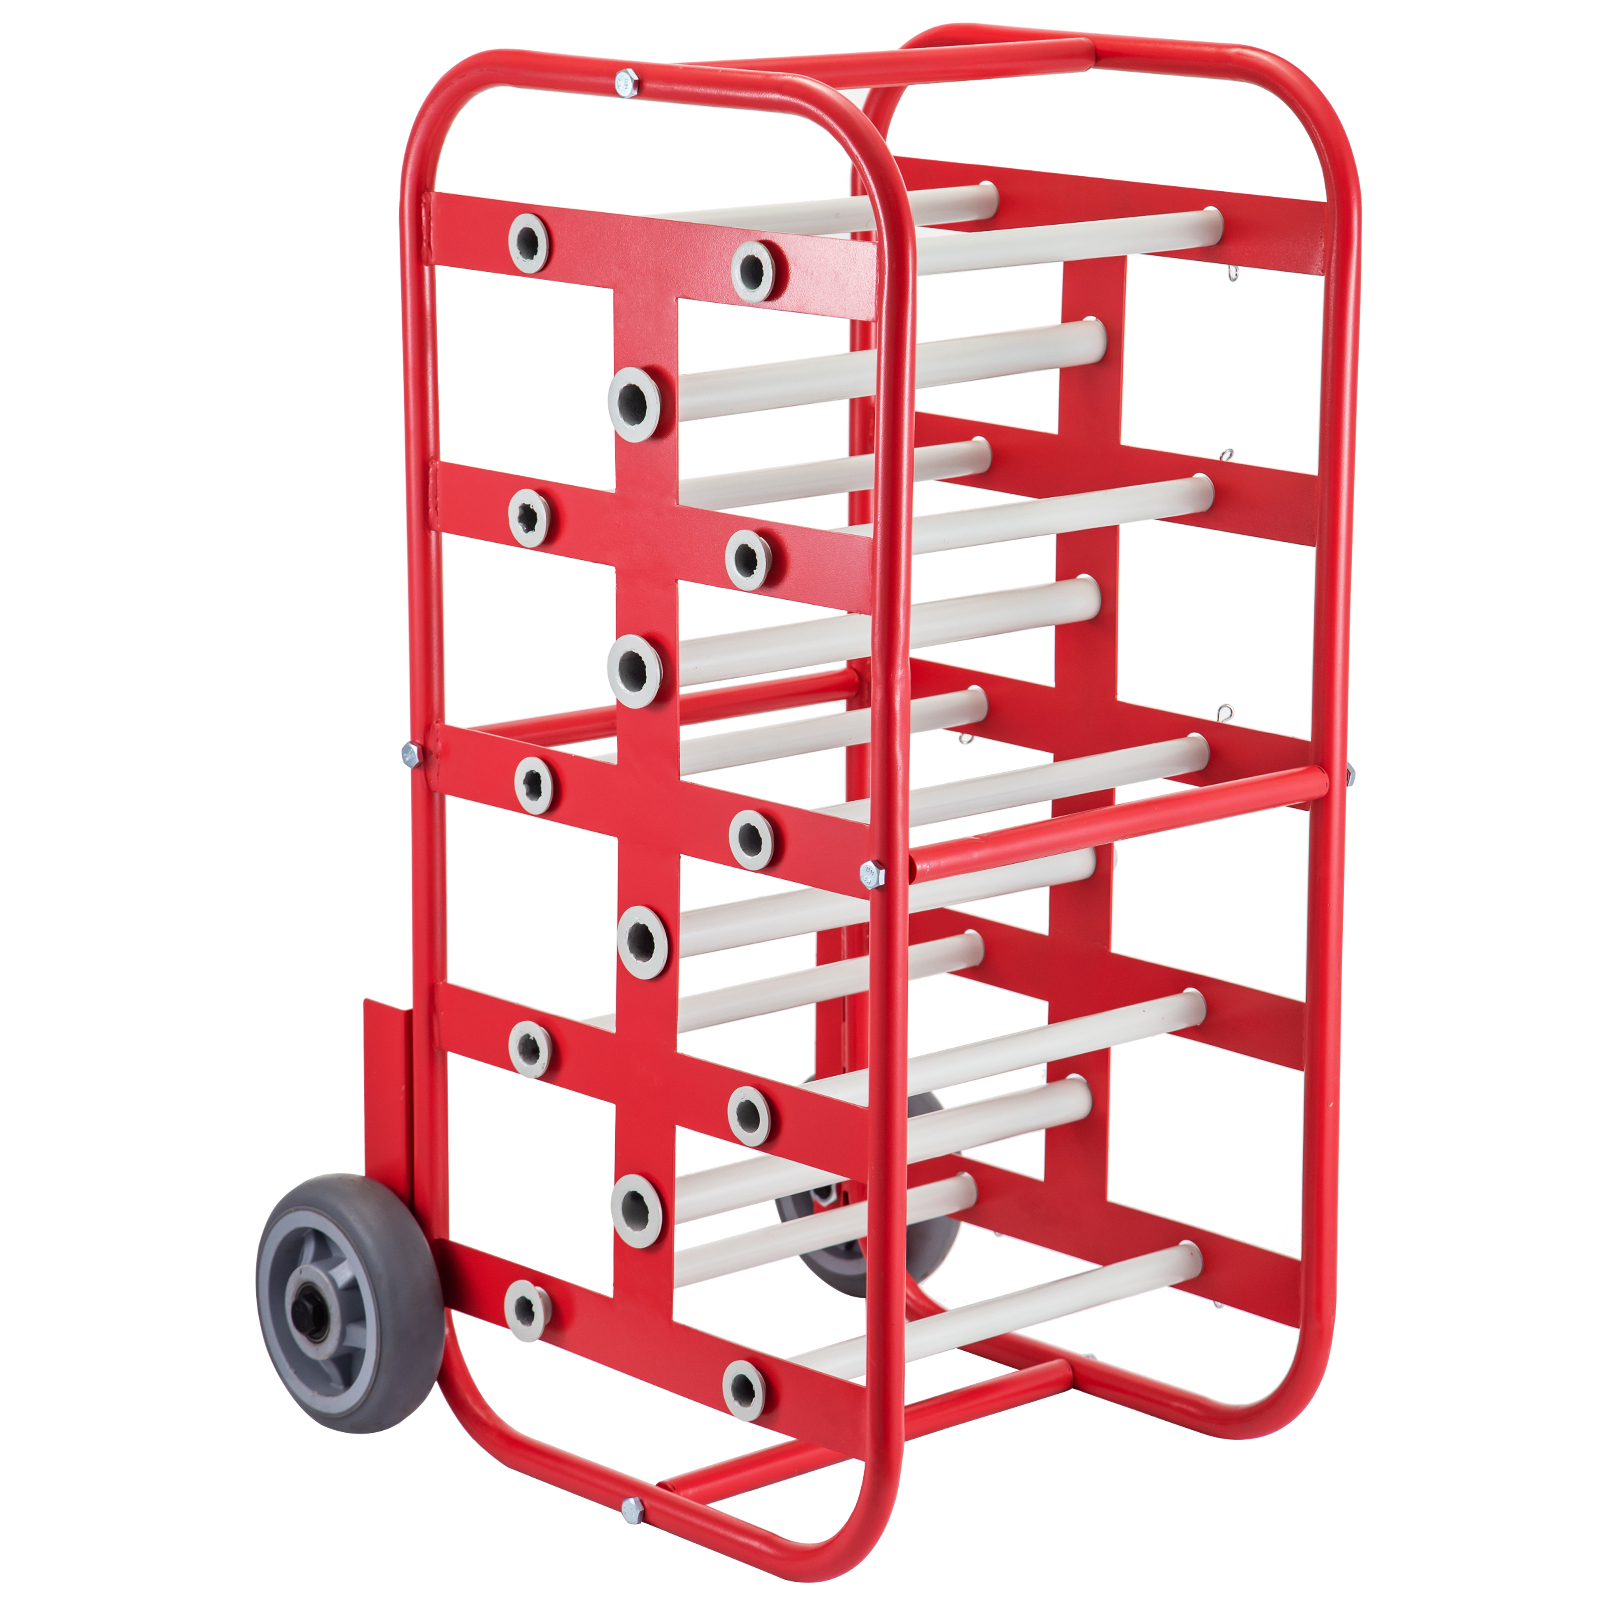 AdirPro Durable Single Axle Cable Caddy - Commercial Industrial Grade Steel  Wire Dispenser - Compact Design Holds Cable Reels Up to 20 Diameter and